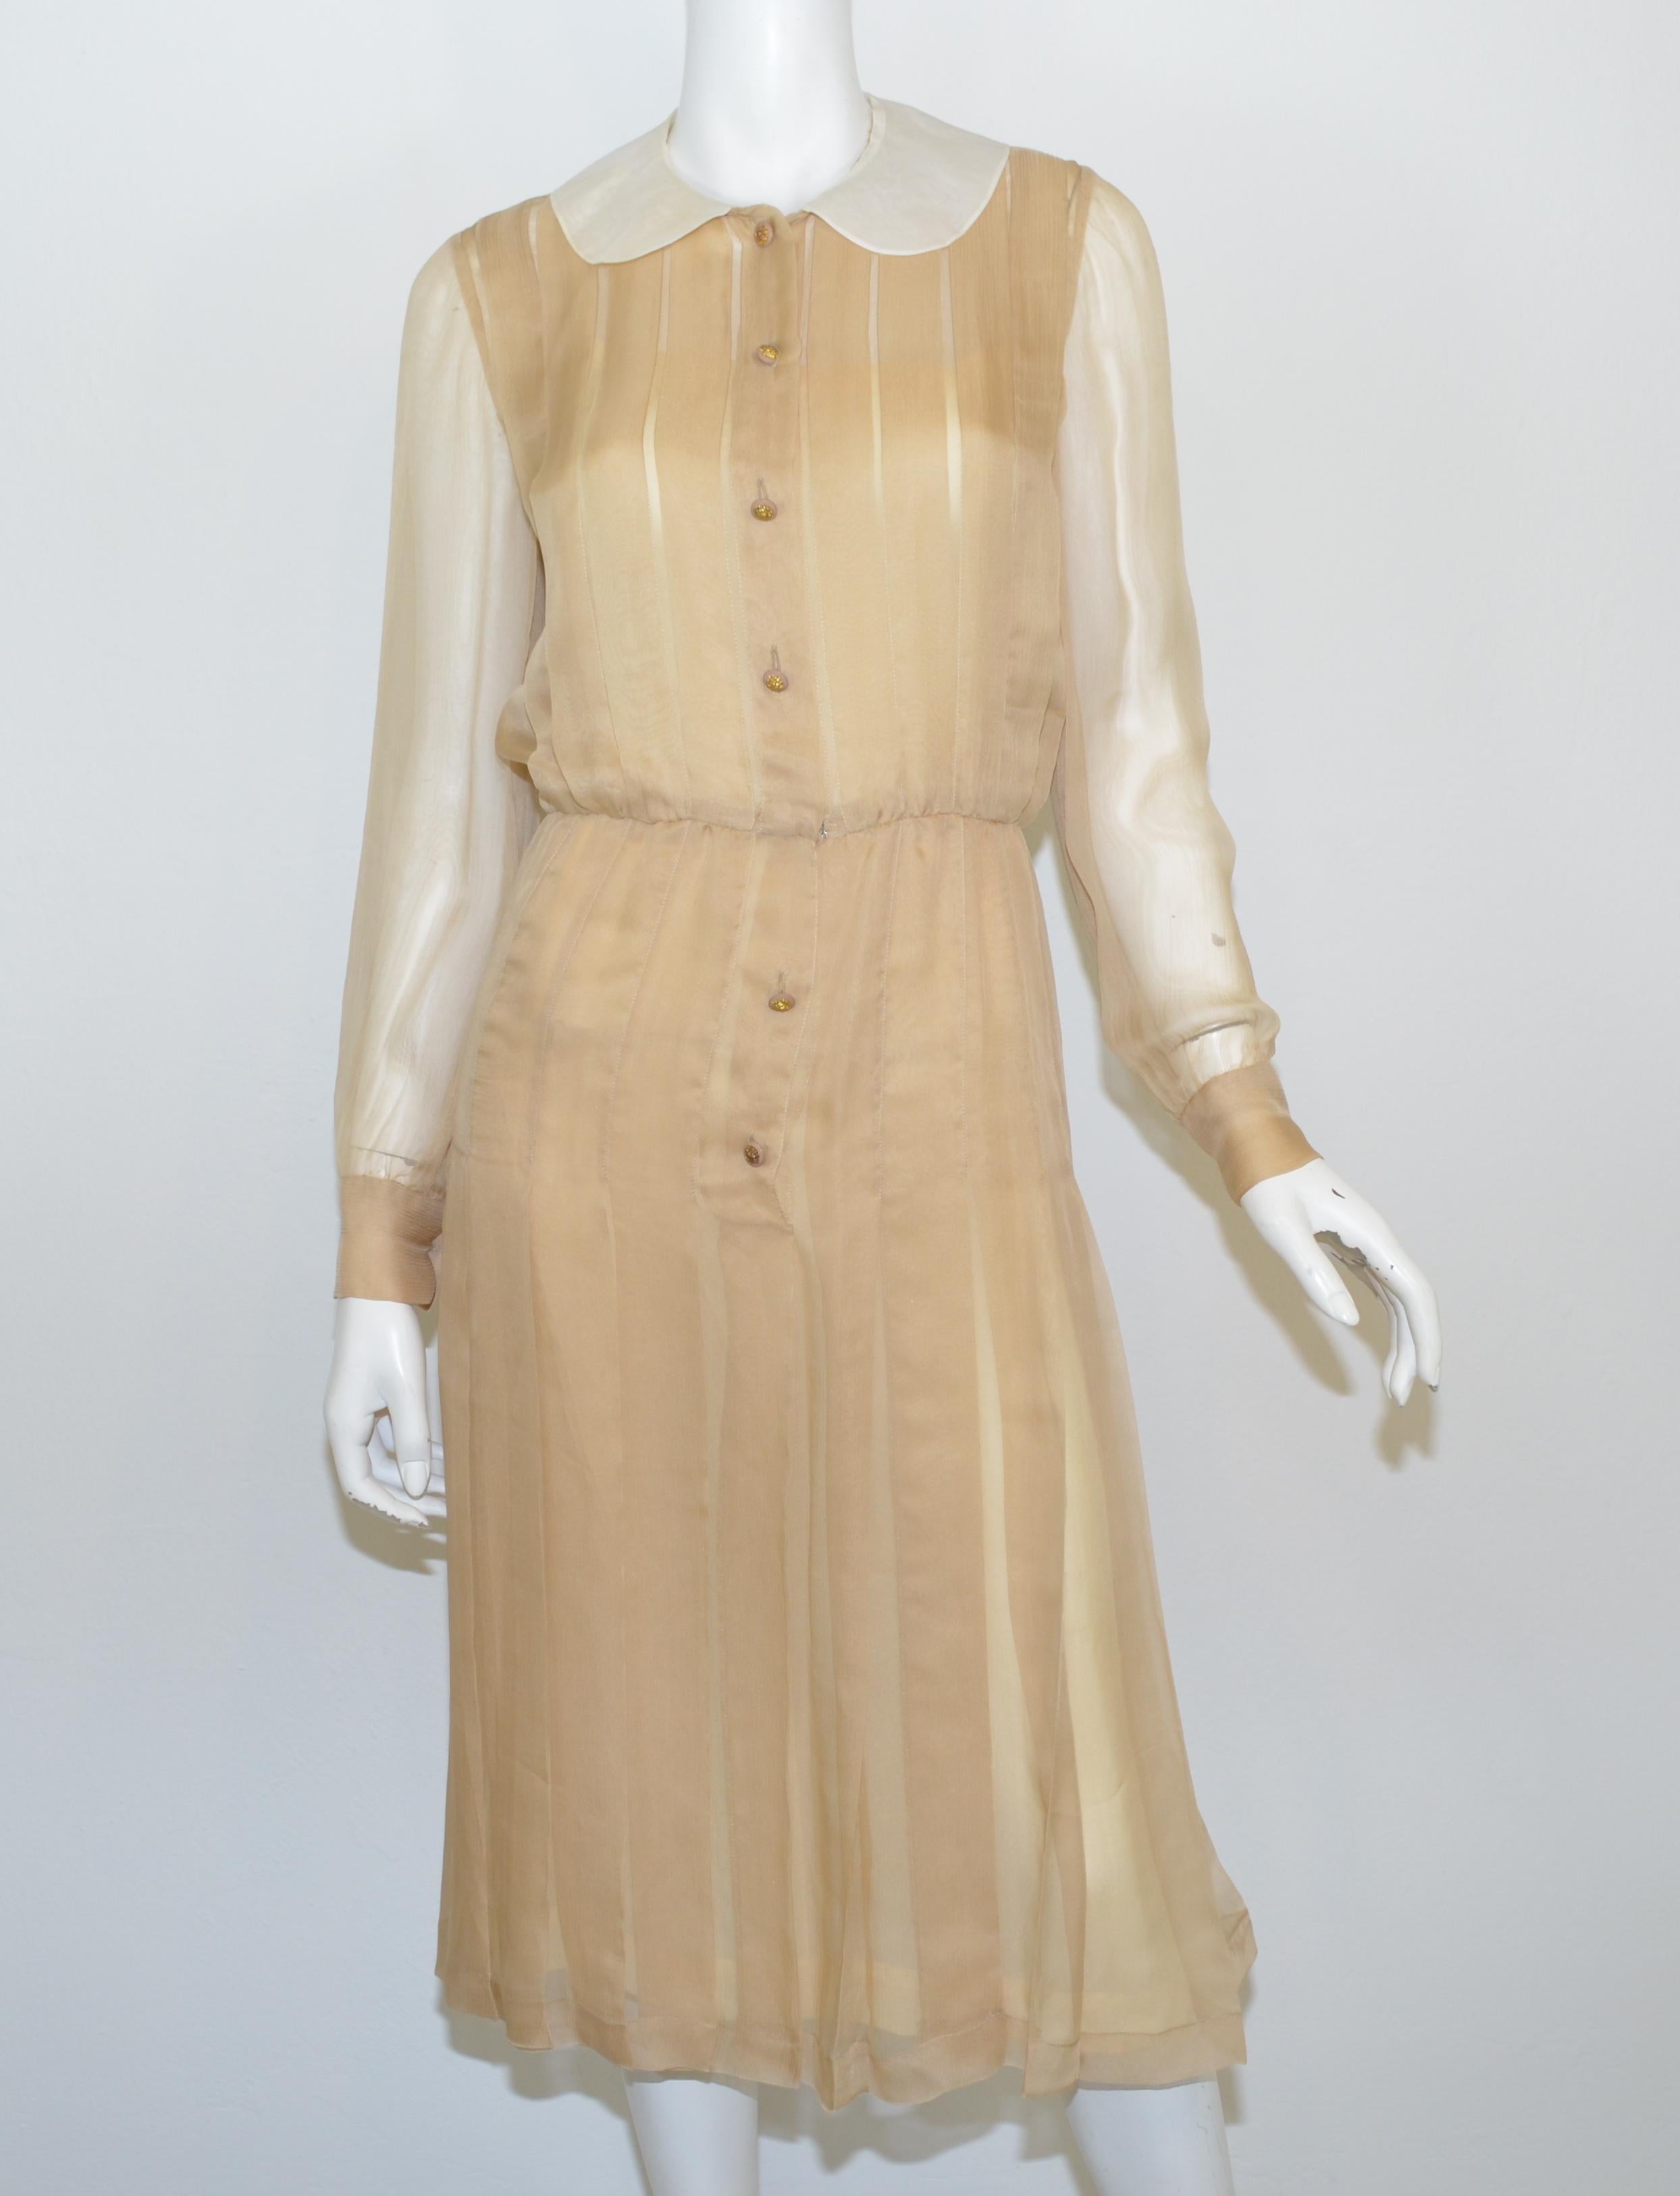 Chanel Boutique dress is featured in a beige-colored silk chiffon fabric with a pleated design, a white Peter Pan organza collar, and gold-tone Lion head button closures that line down the front as well as on the cuffs. Dress includes a neutral slip